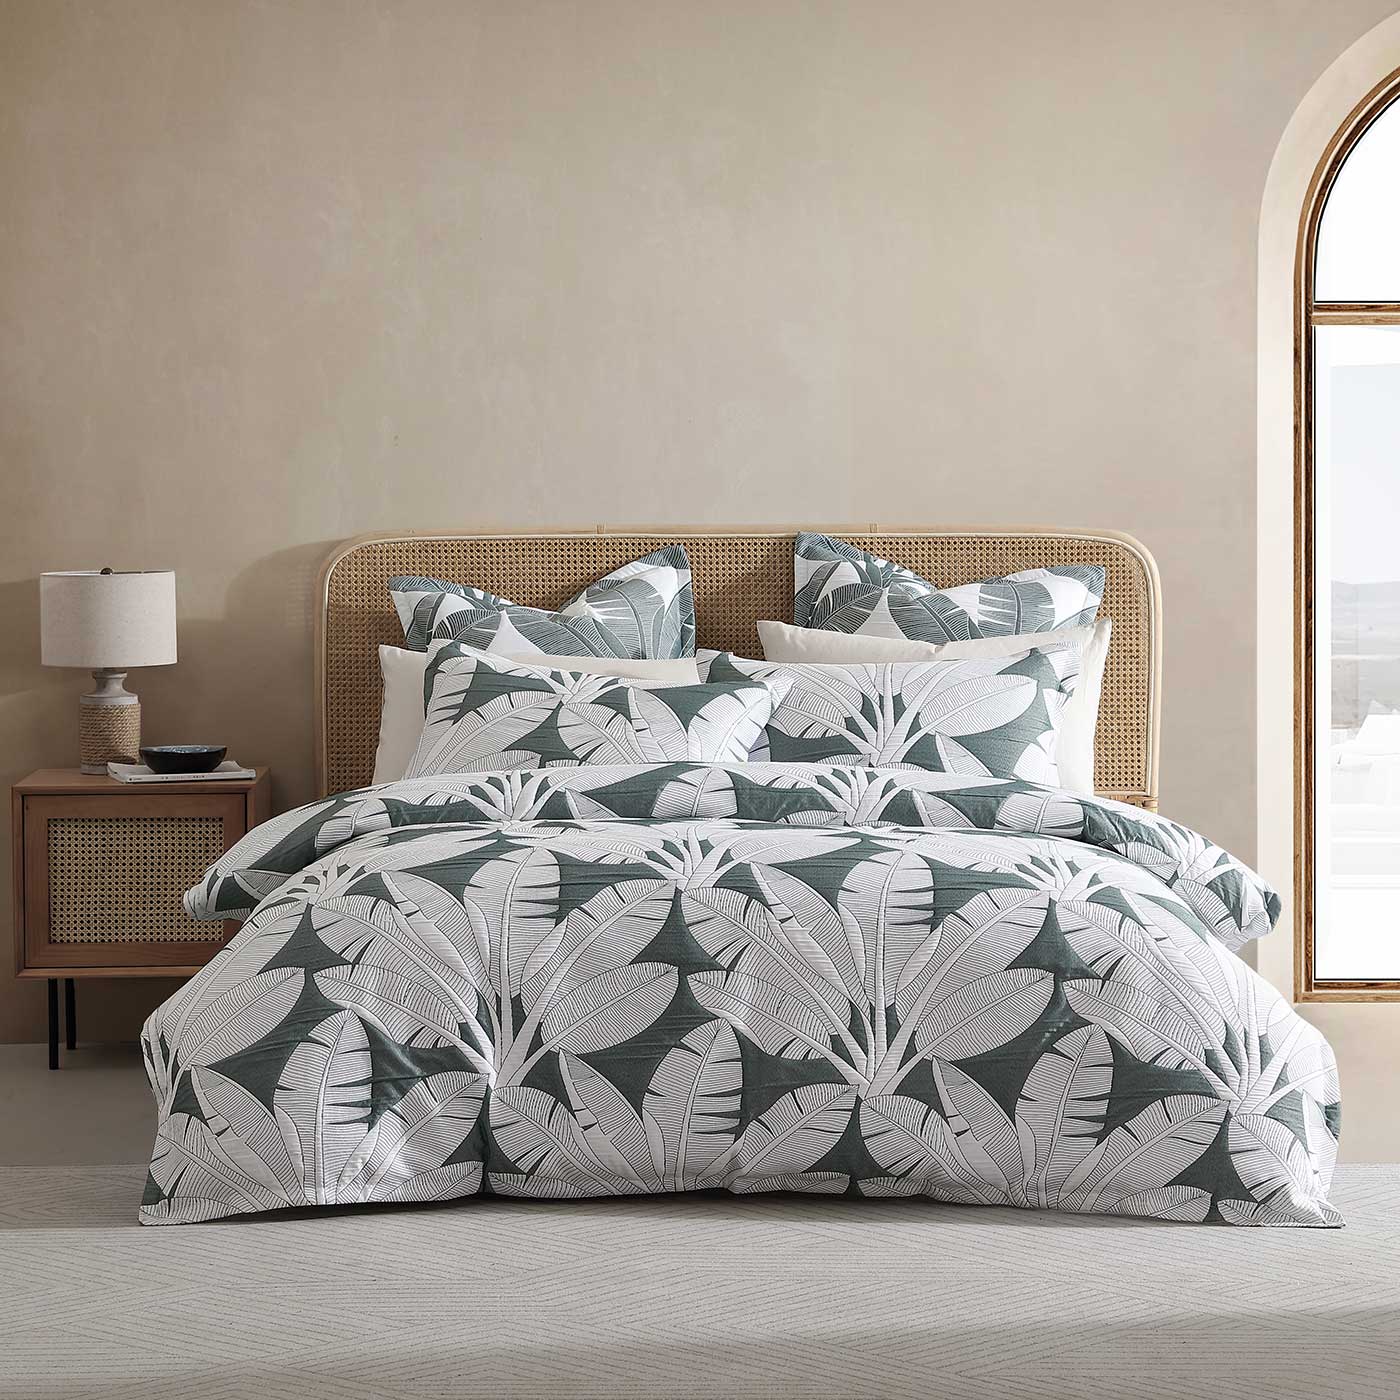 Lagos Olive Quilt Cover Set by Logan and Mason Platinum | Quilt Cover World